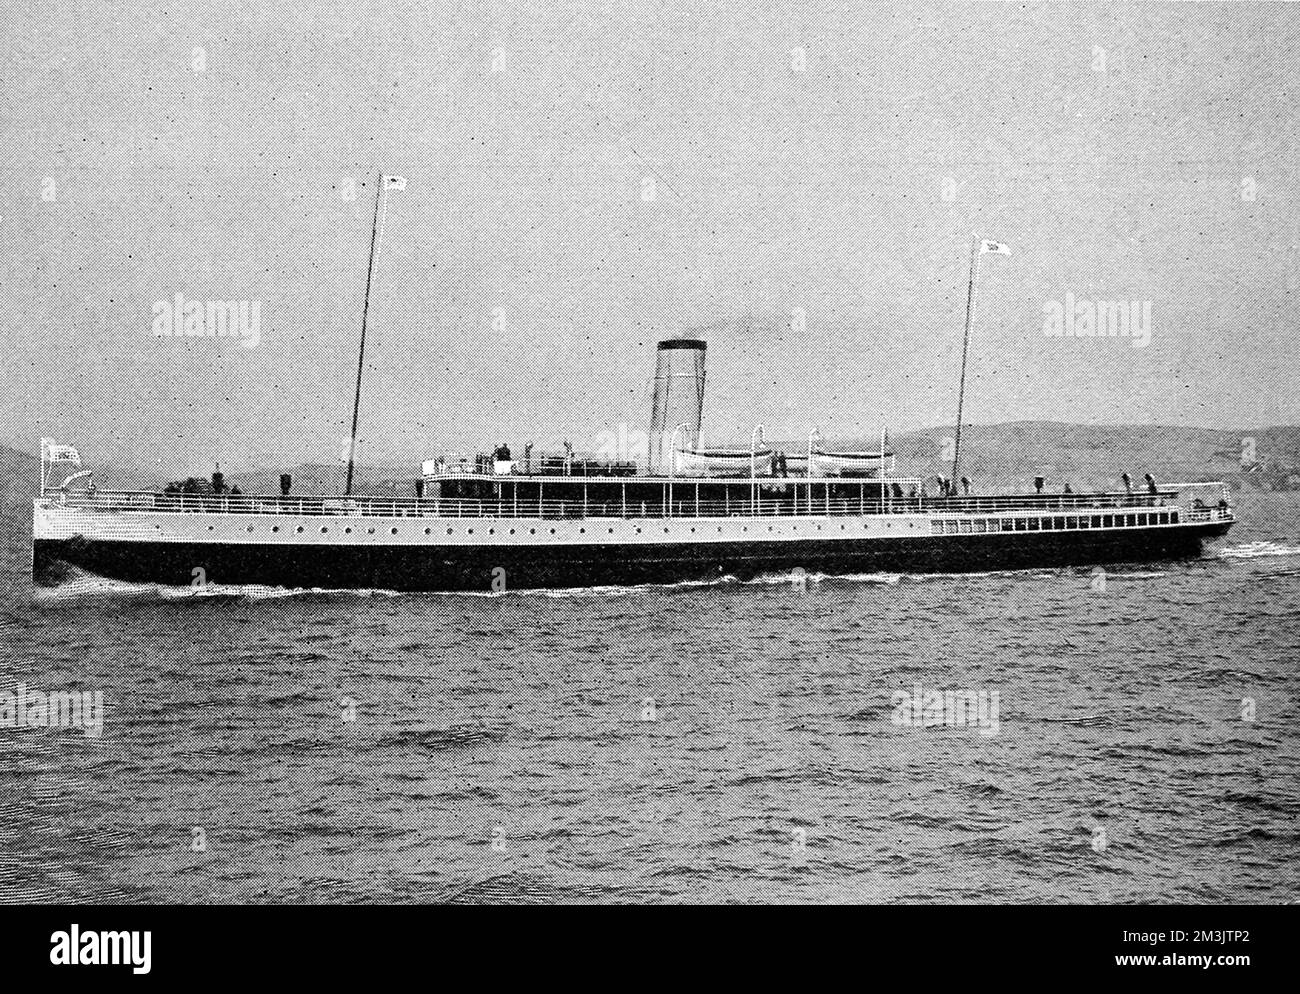 Photograph of the Turbine Steamer 'Kingfisher', built in 1906 by Messrs. Denny of Dumbarton for the General Steam Navigation Company.  She was reputed to be the first turbine passenger steamer operating on the Thames, running a service between London, Southend, Ramsgate, Dover and (once a week) Boulogne.     Date: 1906 Stock Photo